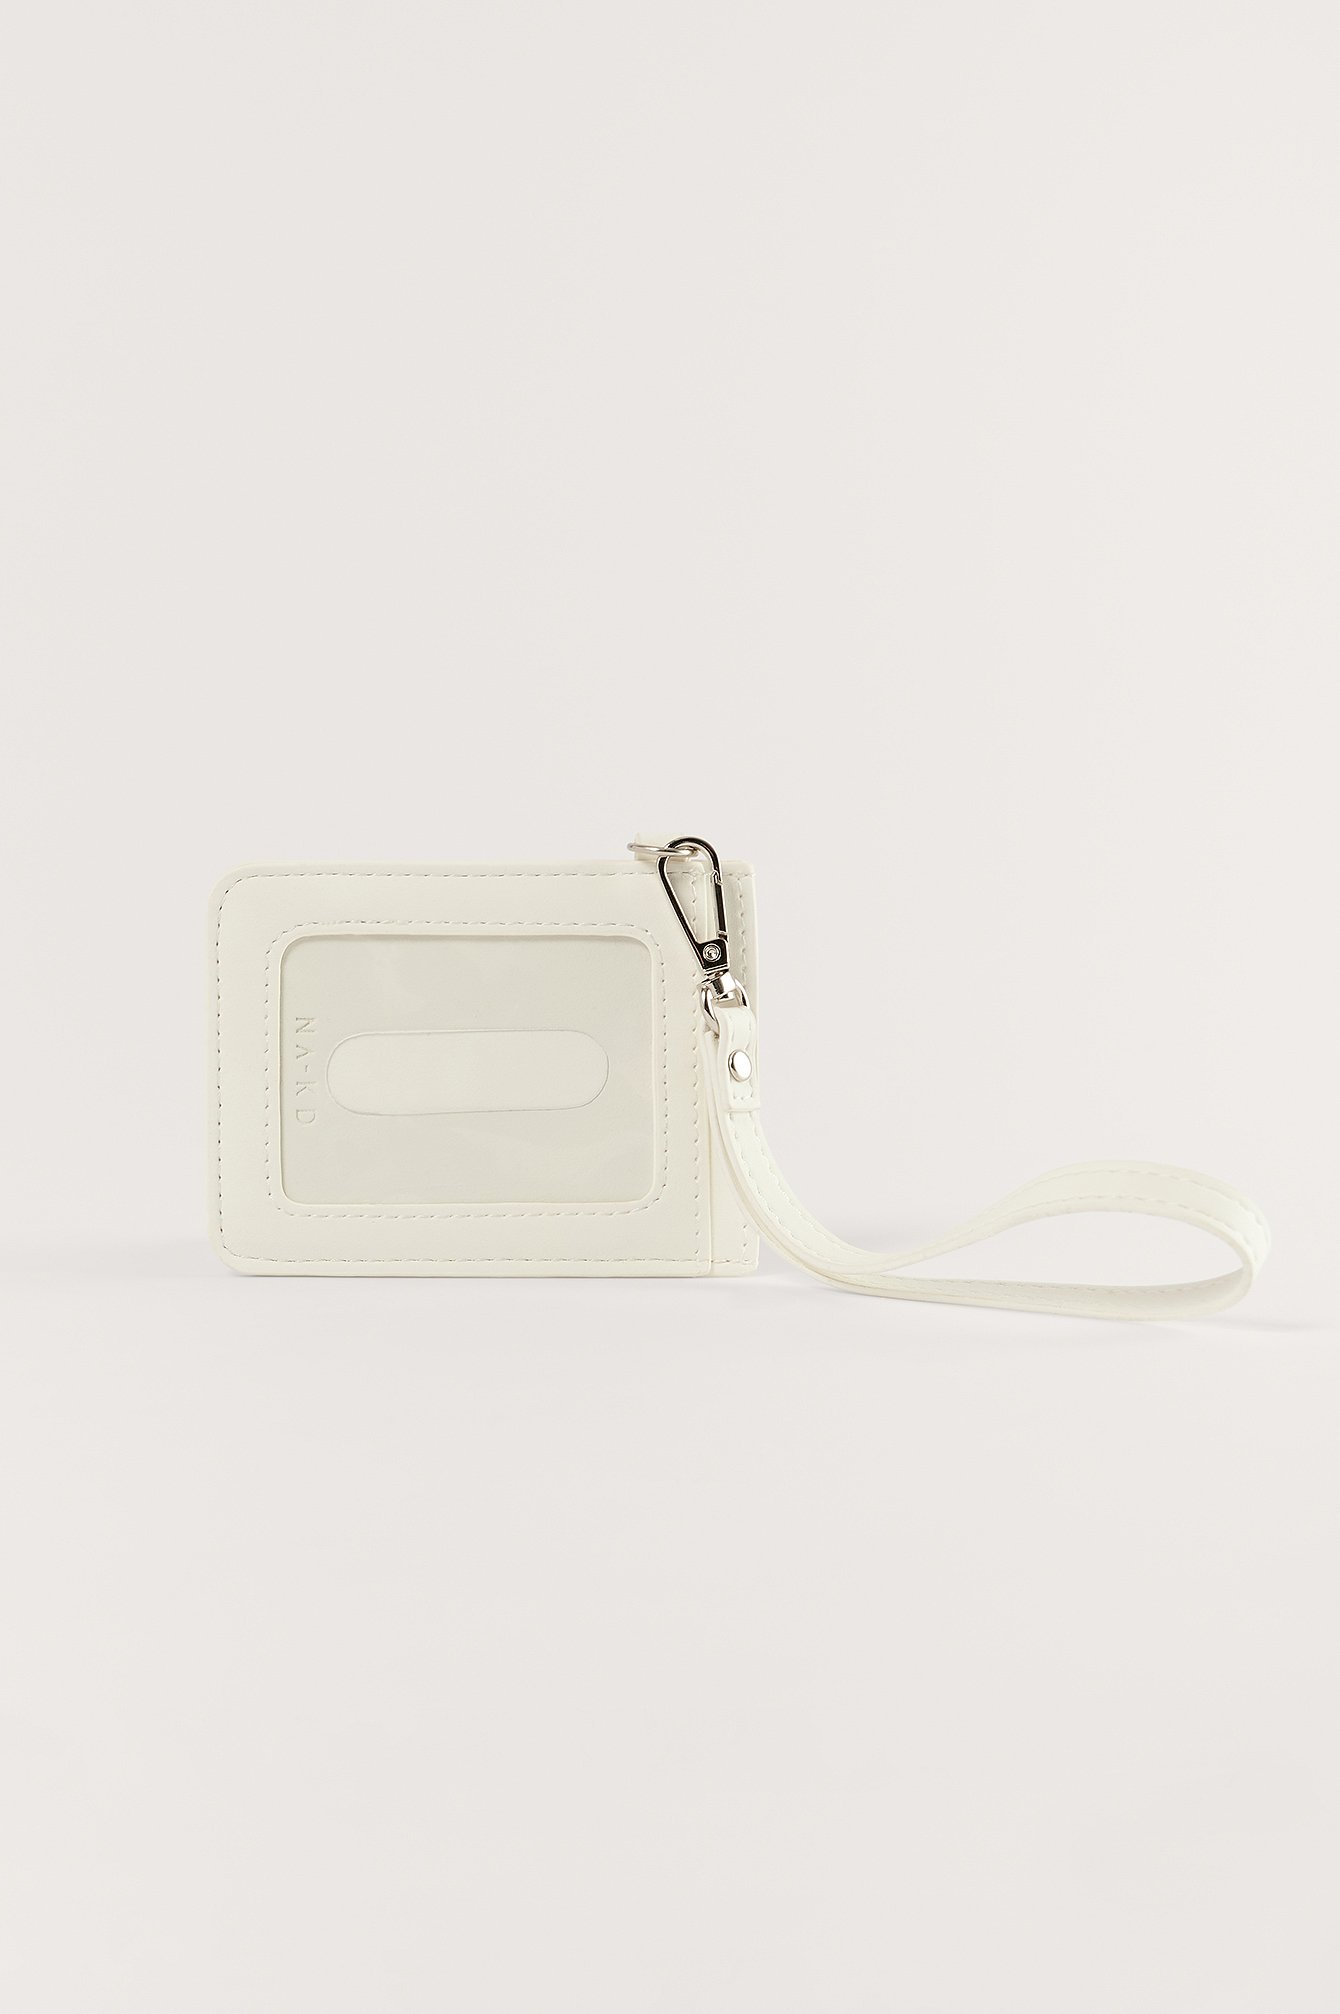 NA-KD Accessories Basic Luggage Tag - Offwhite